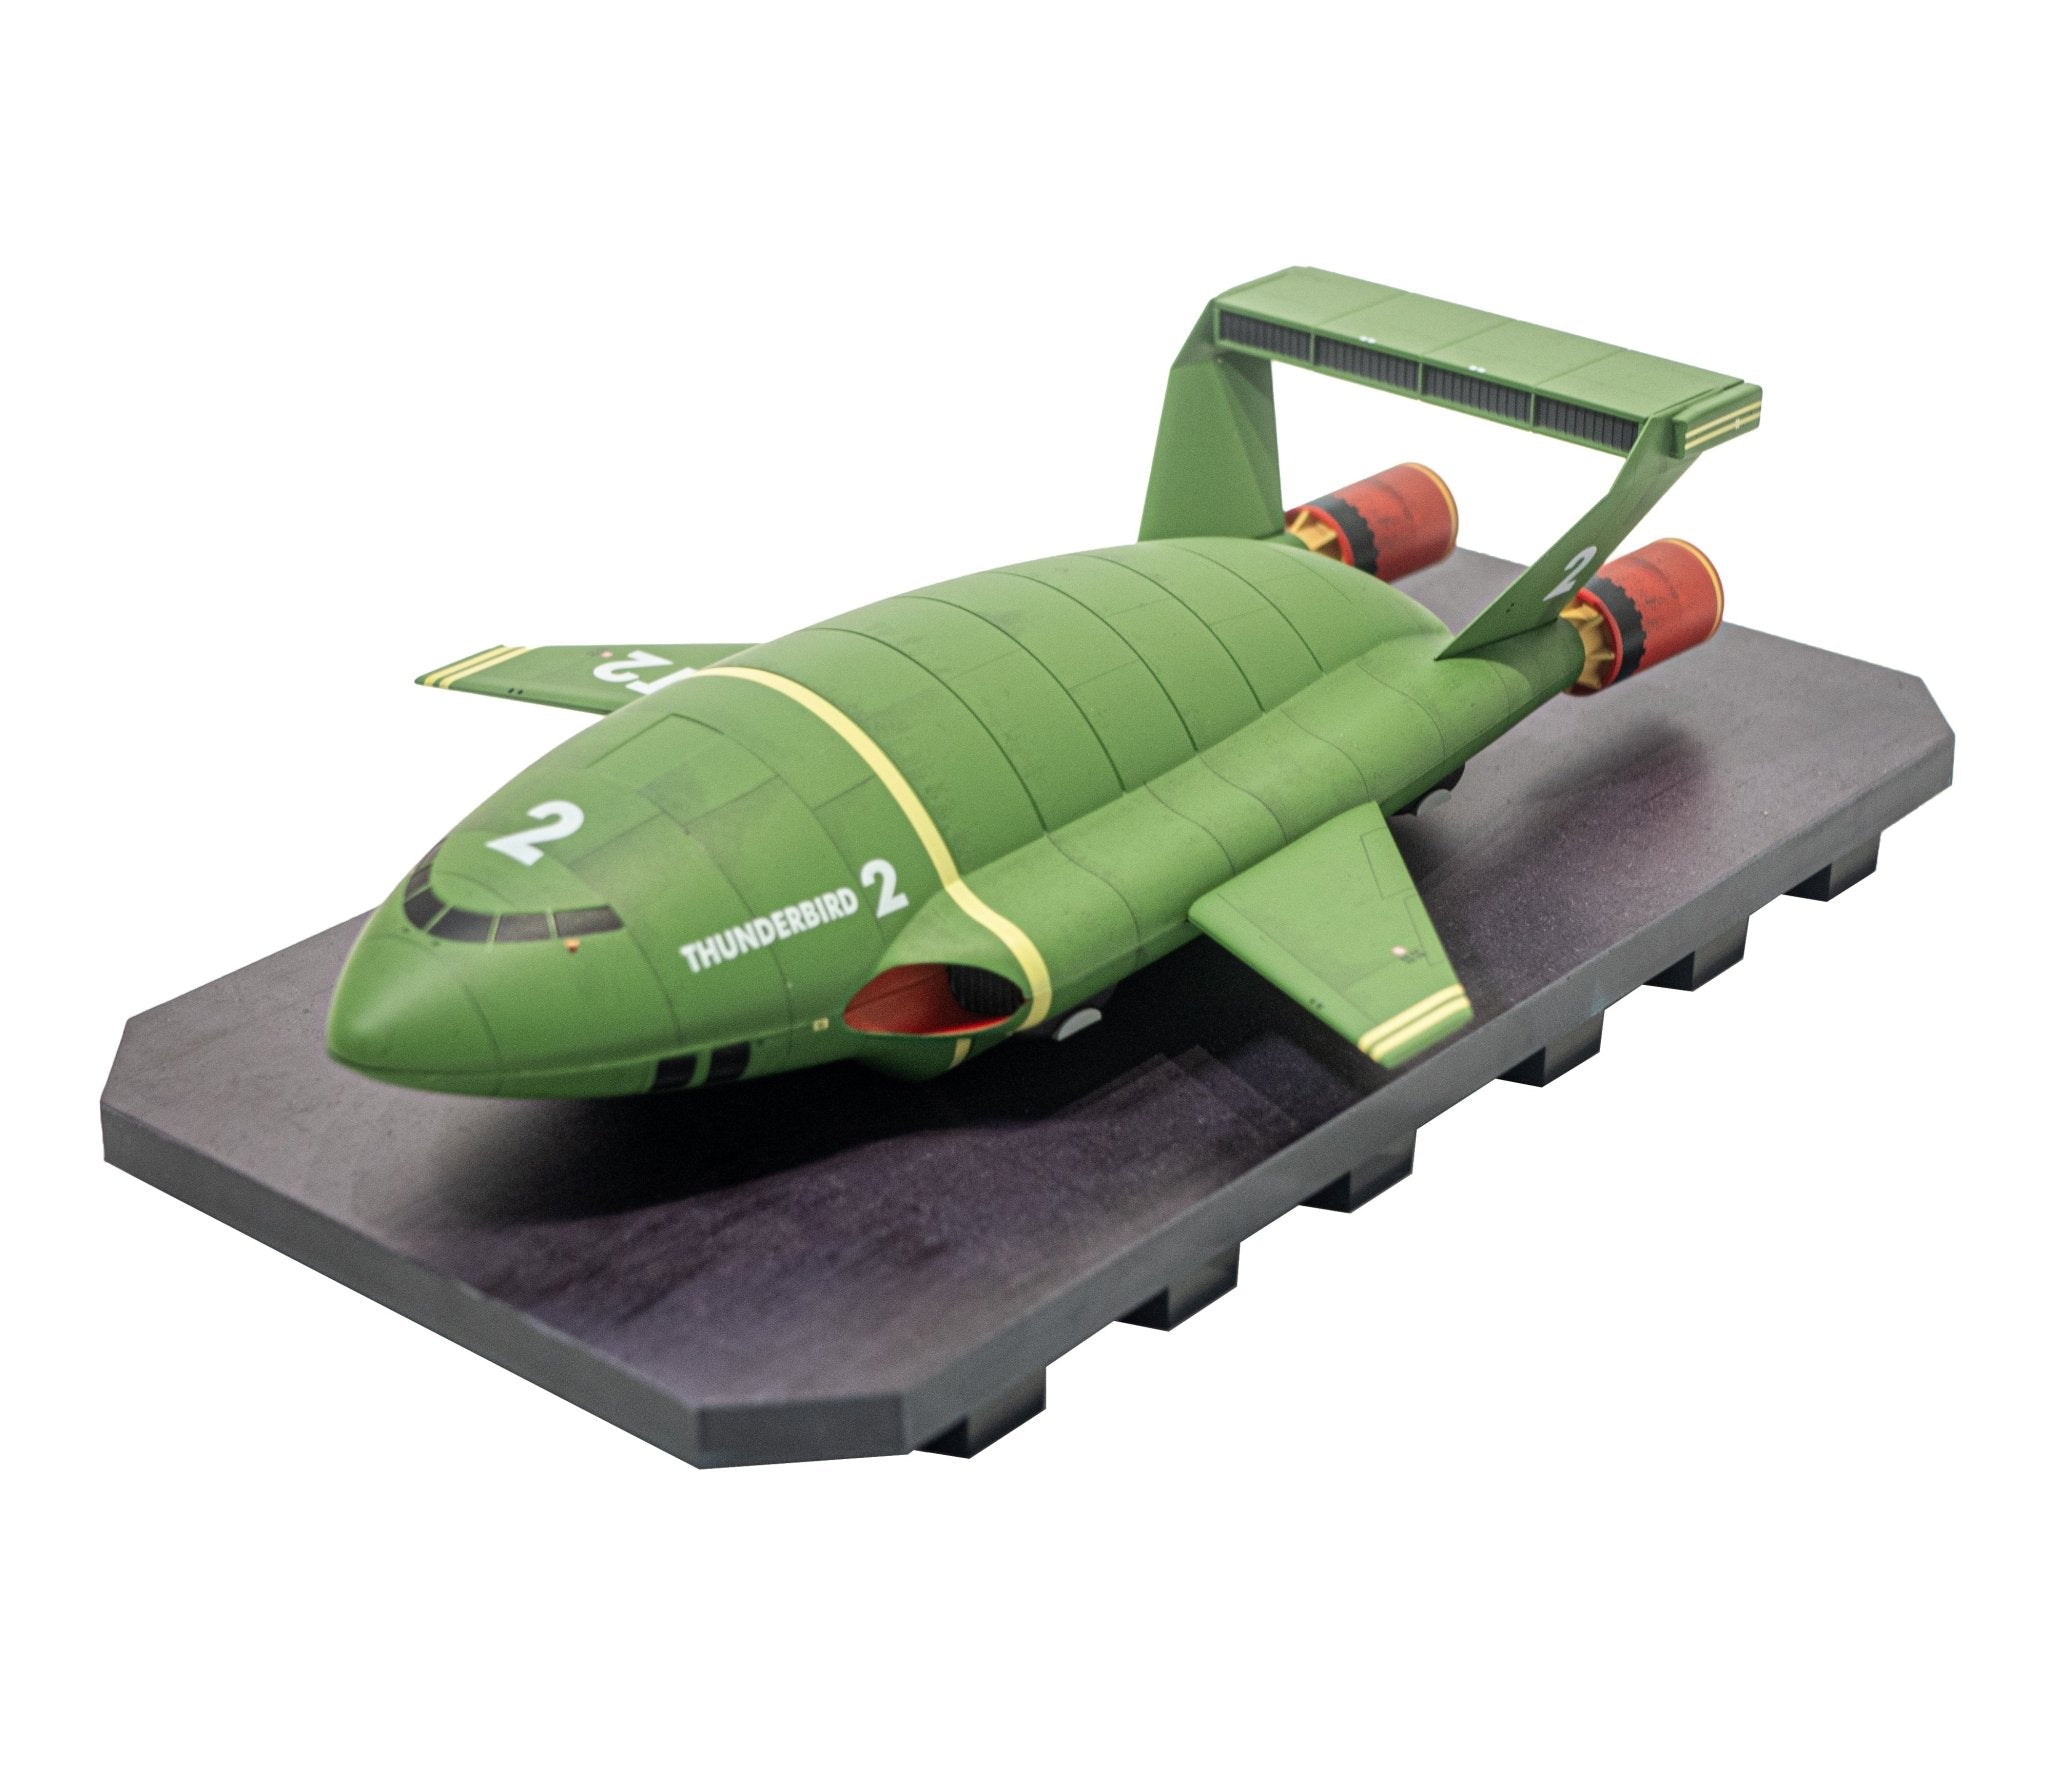 Thunderbird 2 Die Cast Collectible – Limited Edition